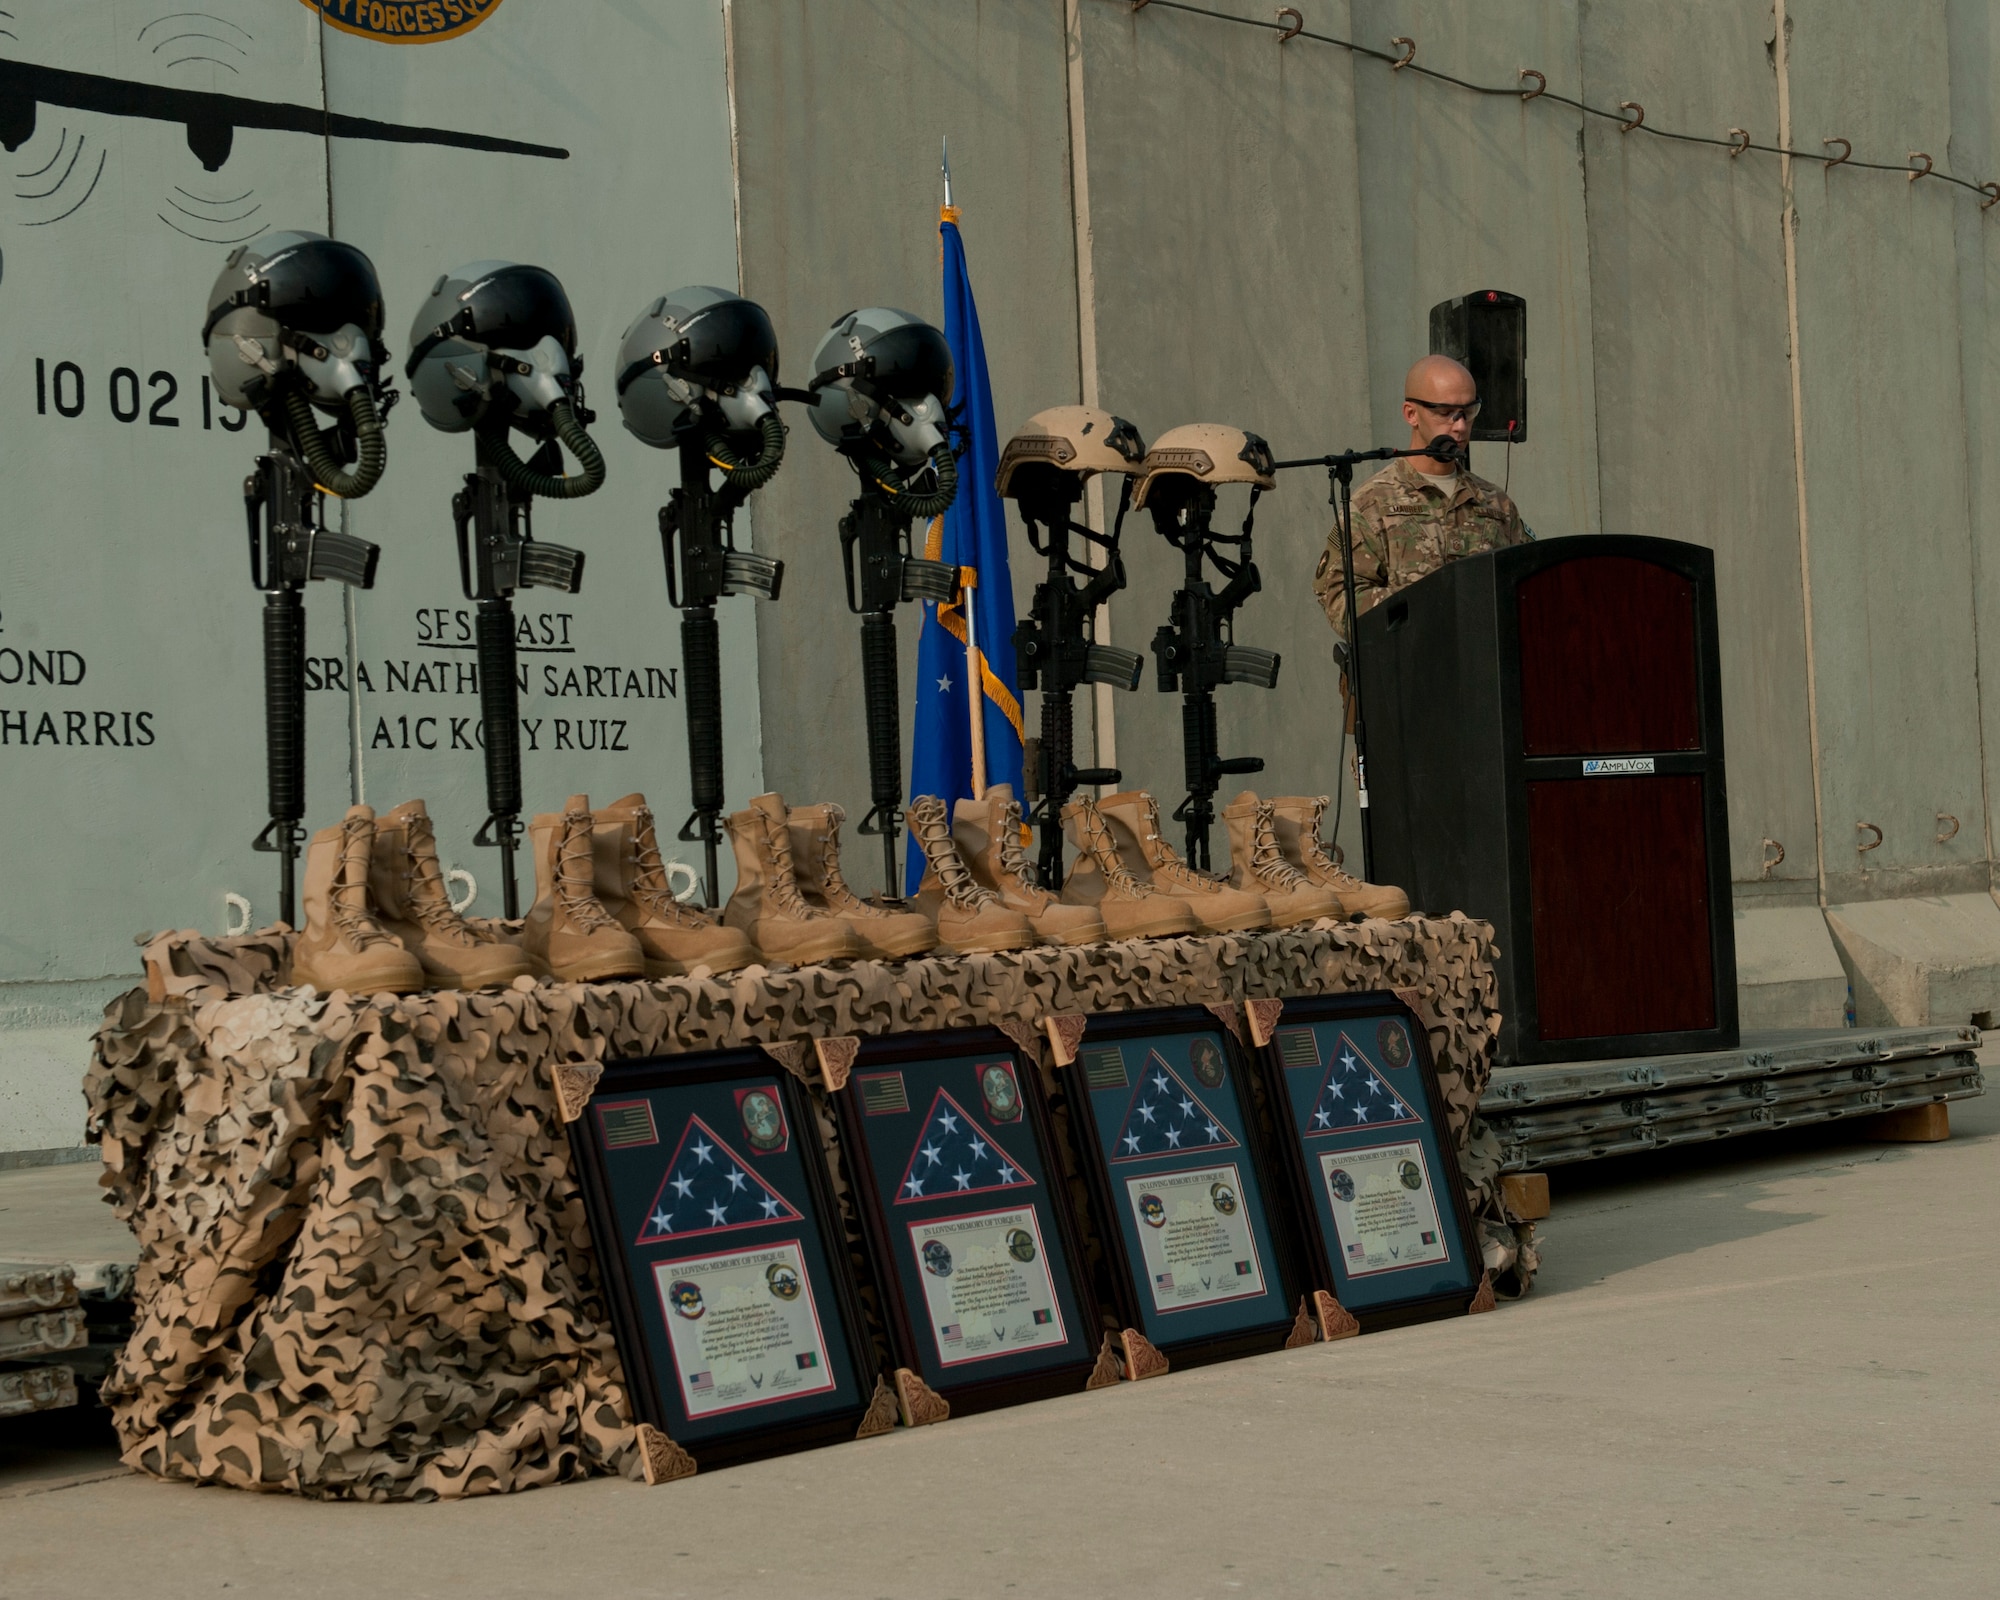 U.S. Air Force Master Sgt. Johnathon Maurer, 455th Expeditionary Security Forces Squadron, first sergeant, reads off the names of those airmen lost during the mishap of TORQE 62, Bagram Airfield, Afghanistan, Oct. 2, 2016. Airmen from the 455th AEW gathered to remember the six Airmen and five contractors lost when TORQE 62 crashed Oct. 2, 2015. (U.S. Air Force photo by Capt. Korey Fratini)